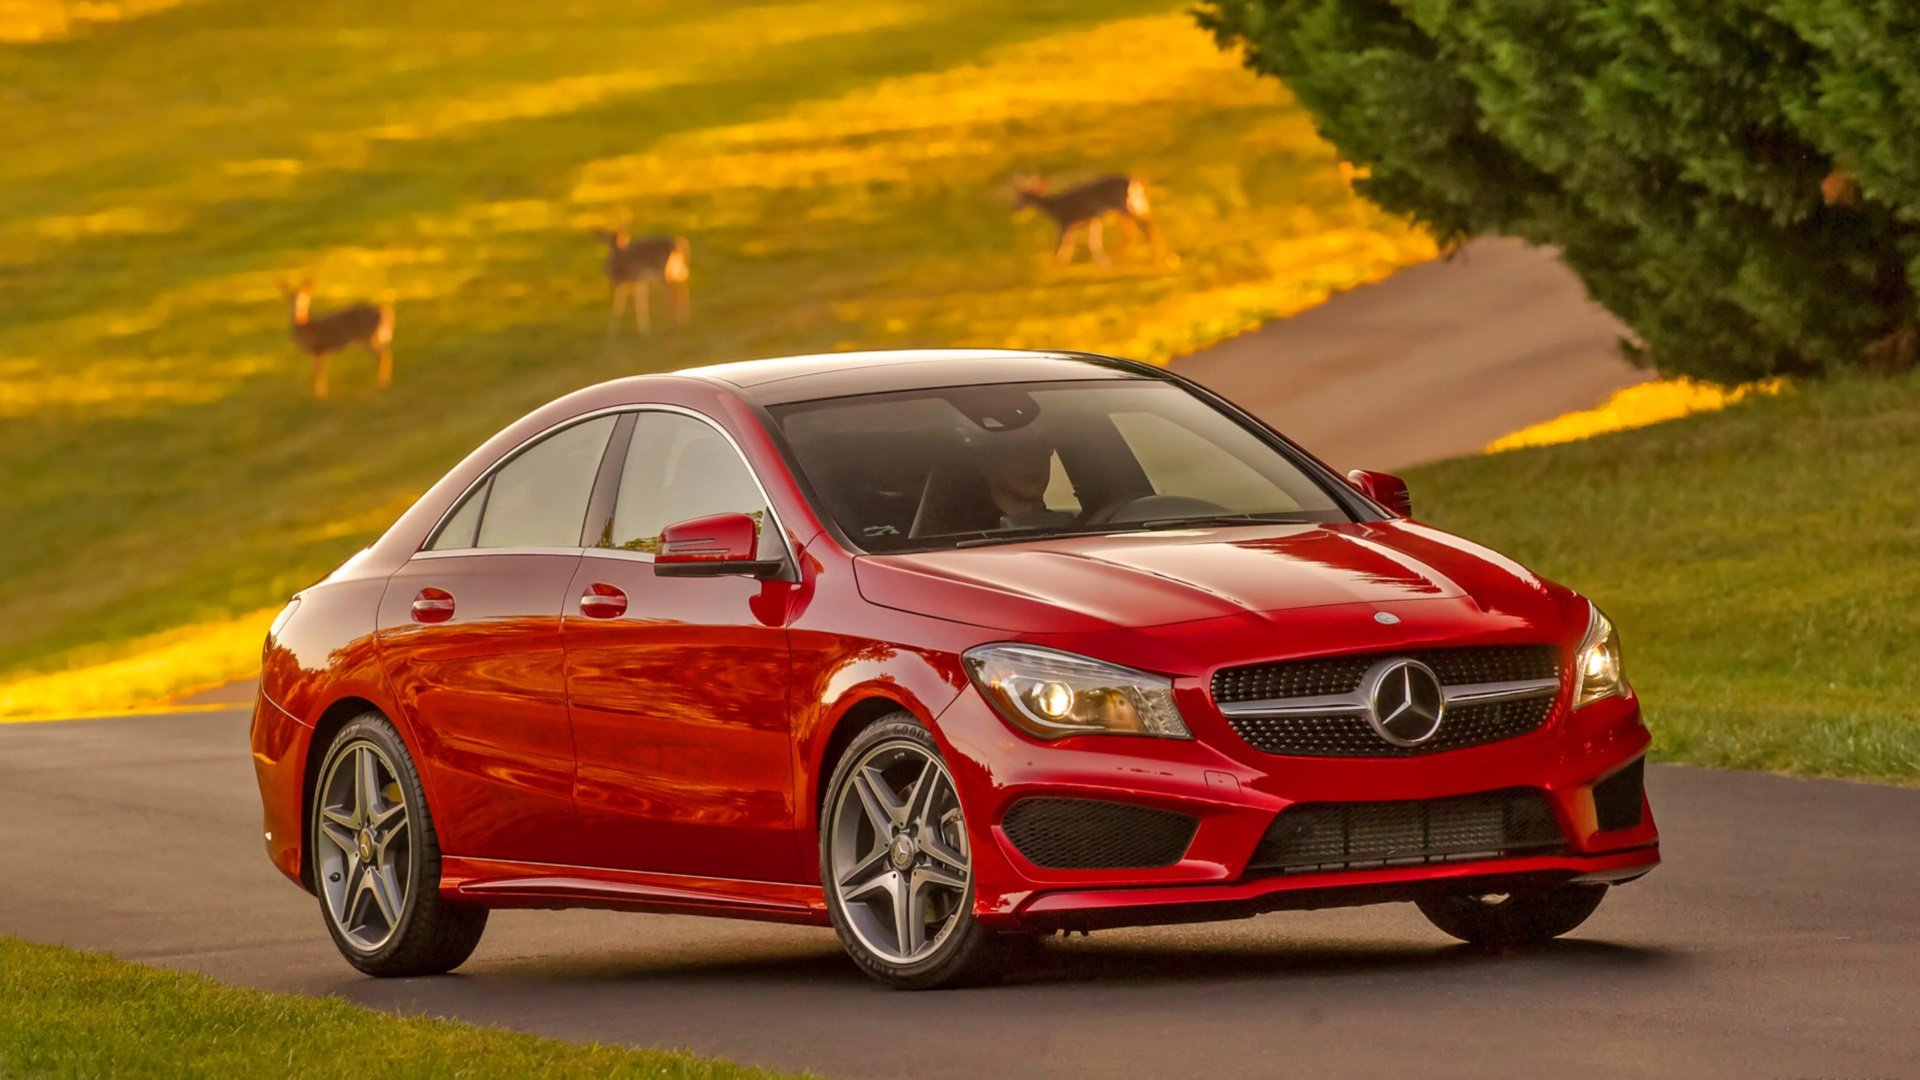 High resolution Mercedes-Benz CLA-Class hd 1920x1080 background ID:10226 for PC